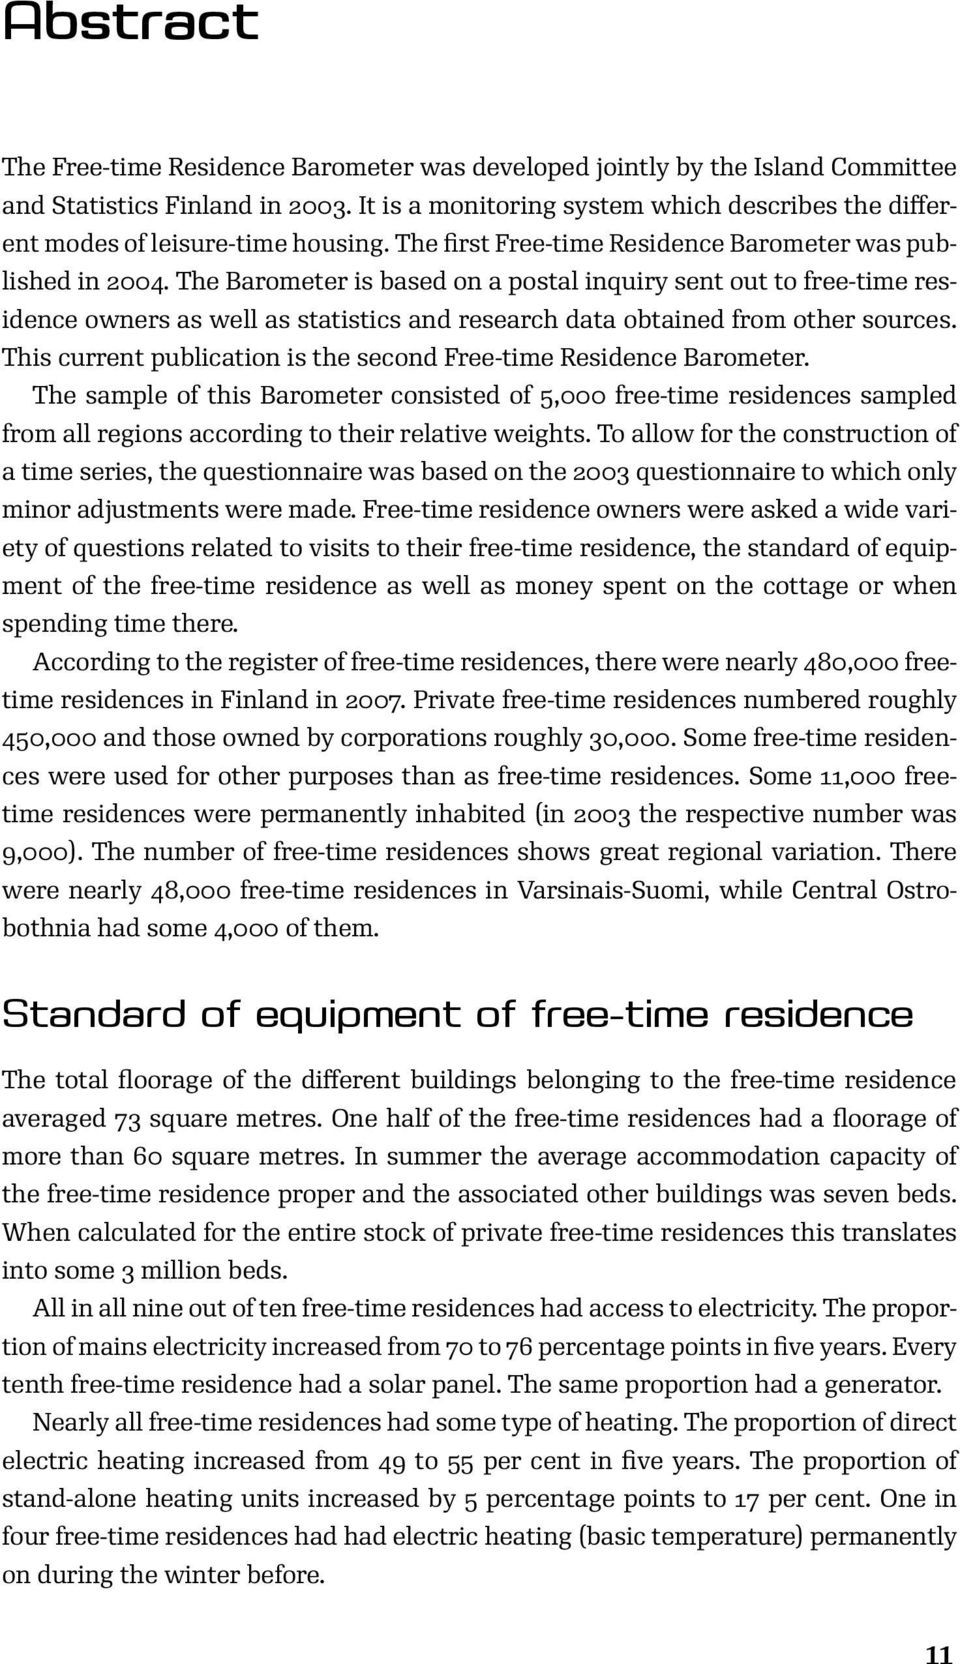 The Barometer is based on a postal inquiry sent out to free-time residence owners as well as statistics and research data obtained from other sources.